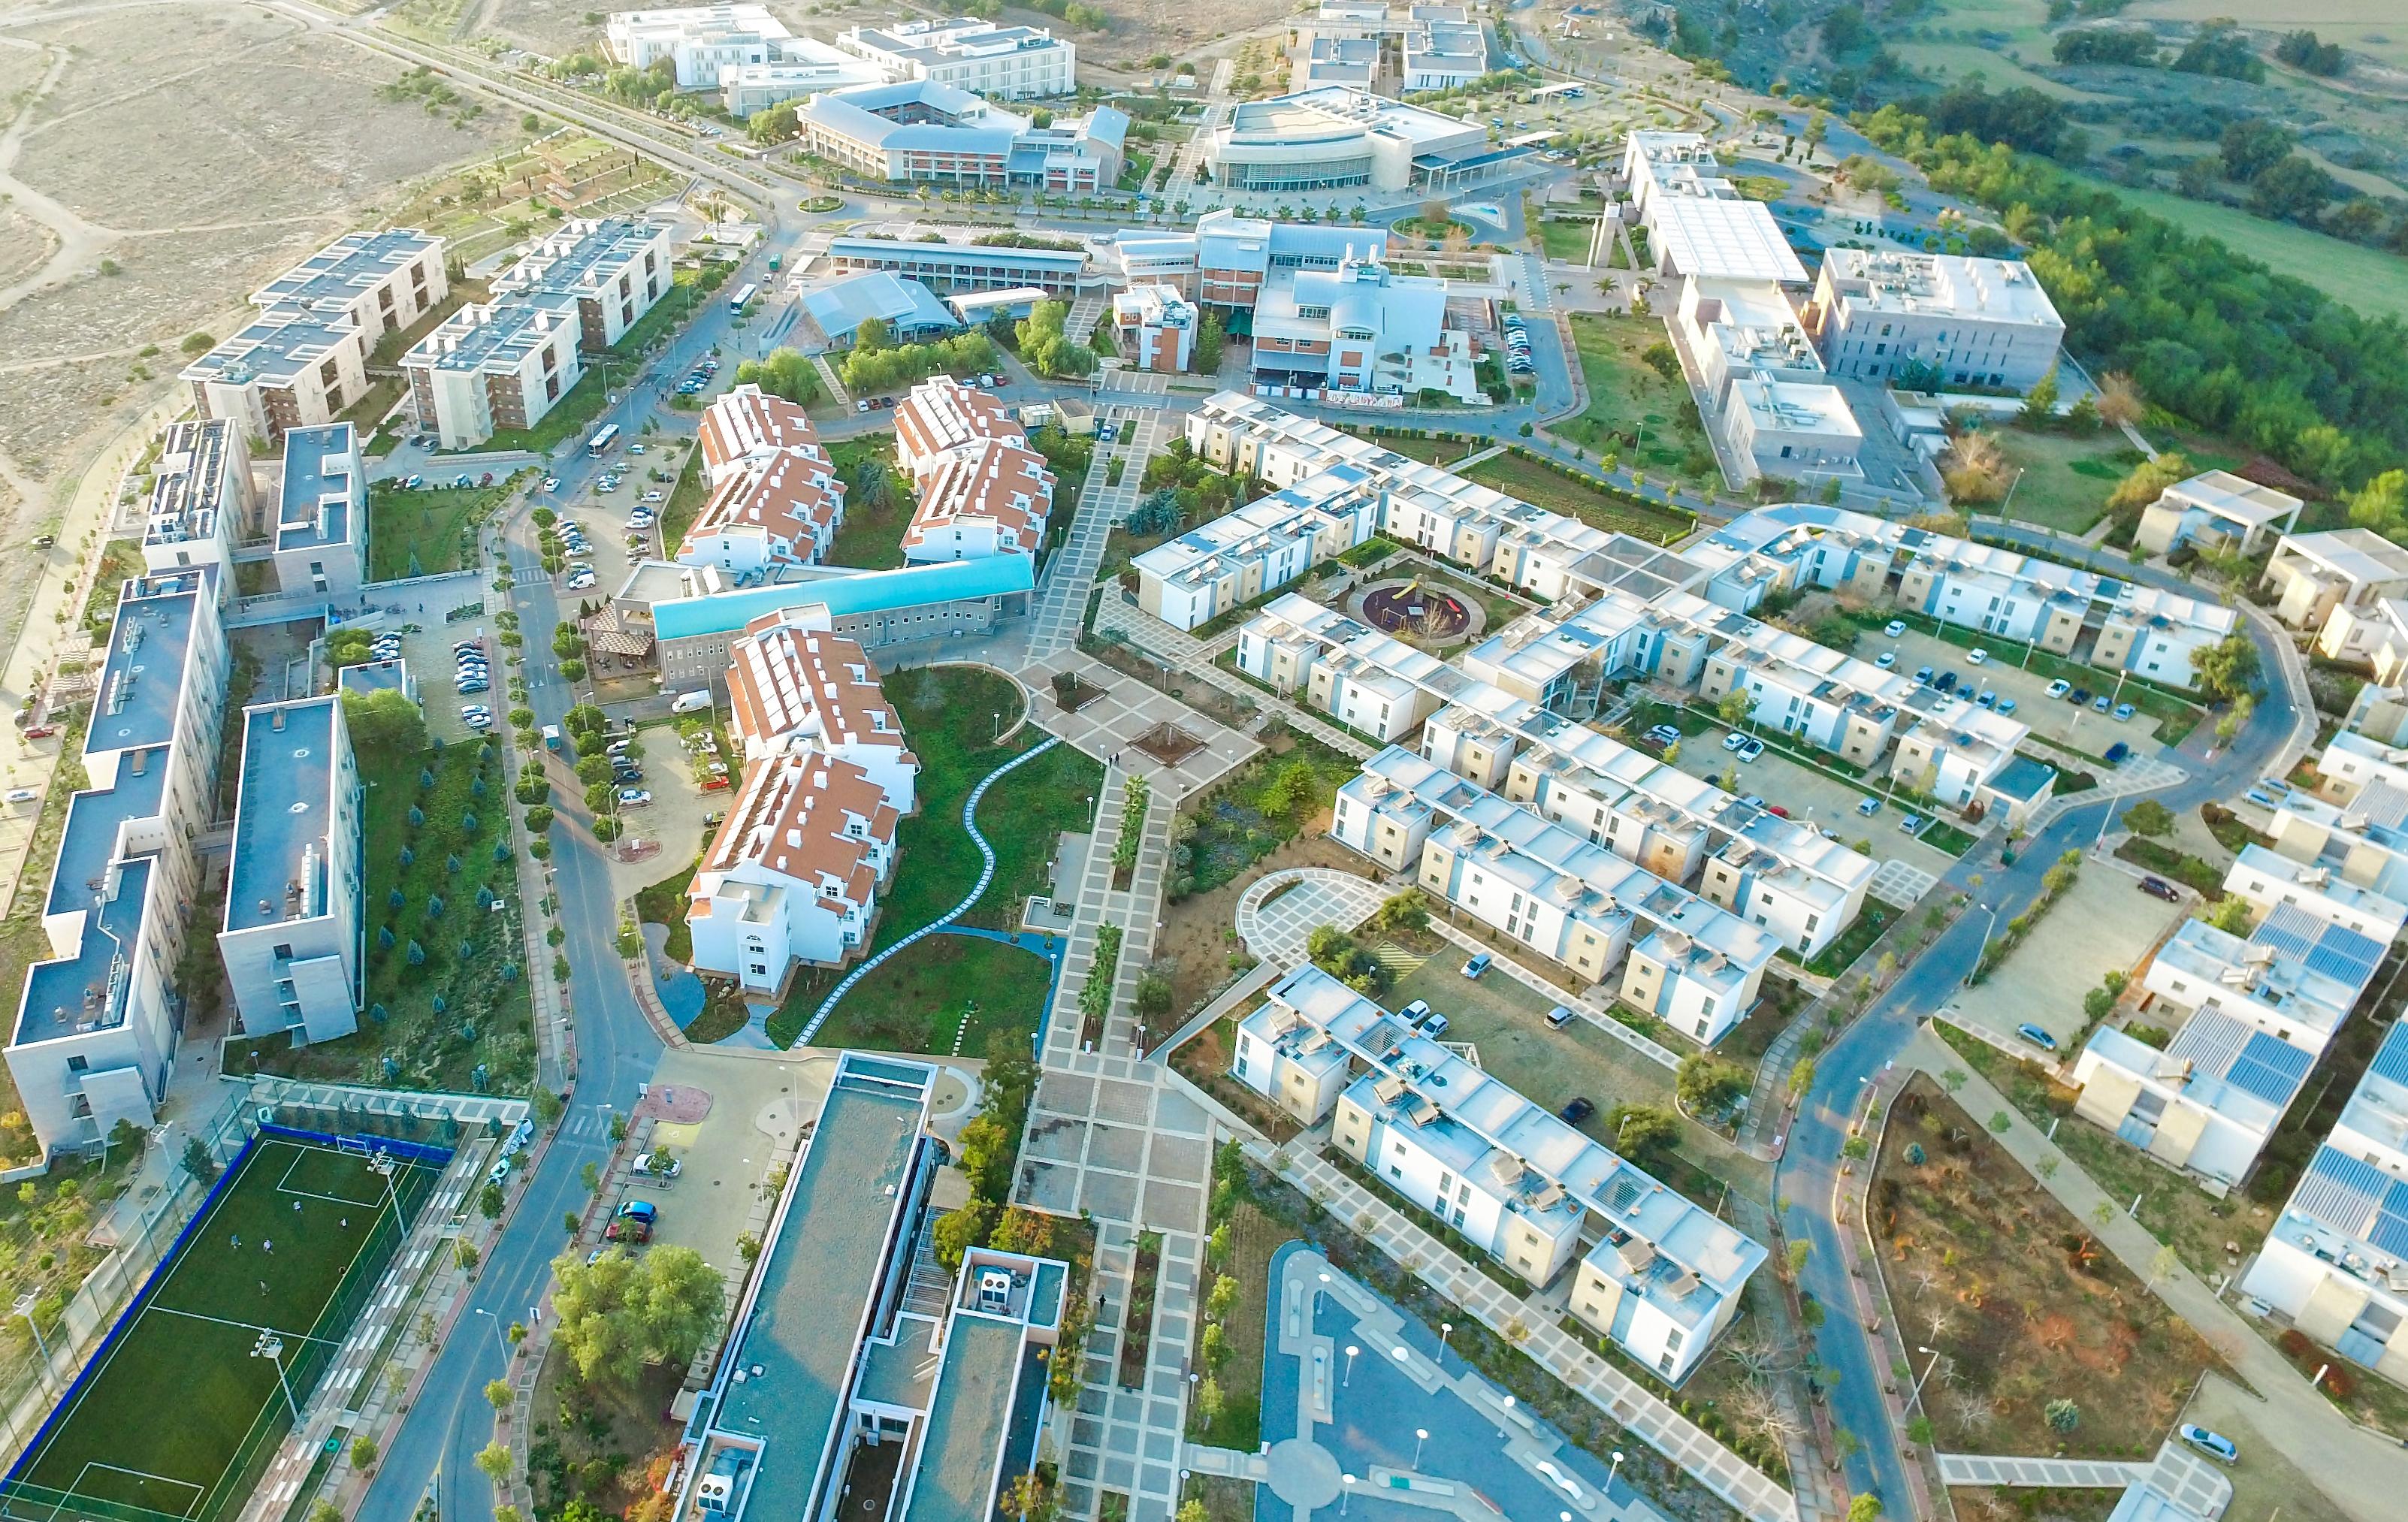 Middle East Technical University Northern Cyprus Campus